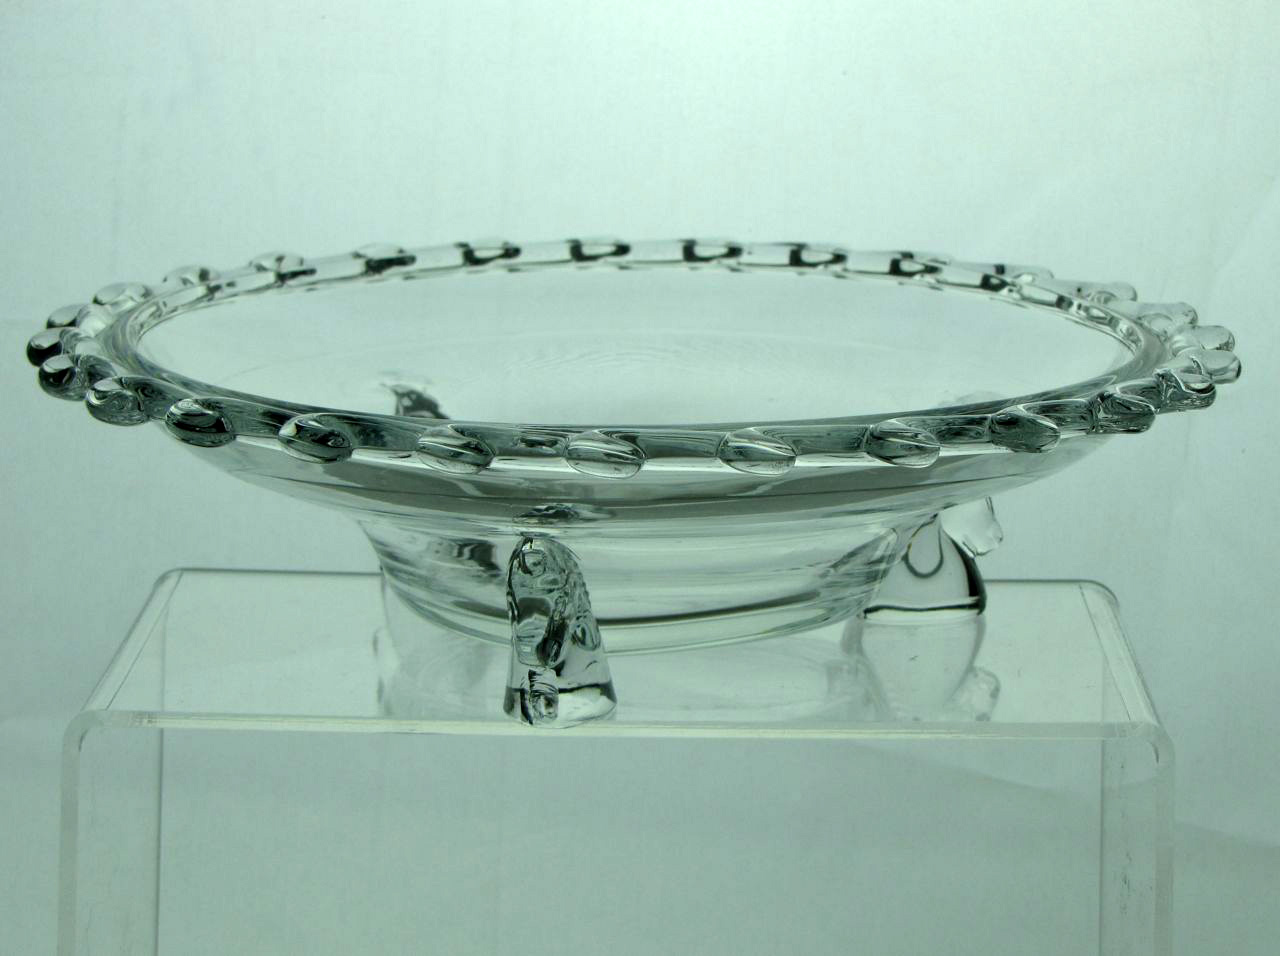 Heisey #1540 Lariat Floral Bowl with Horsehead Feet, Crystal, non production